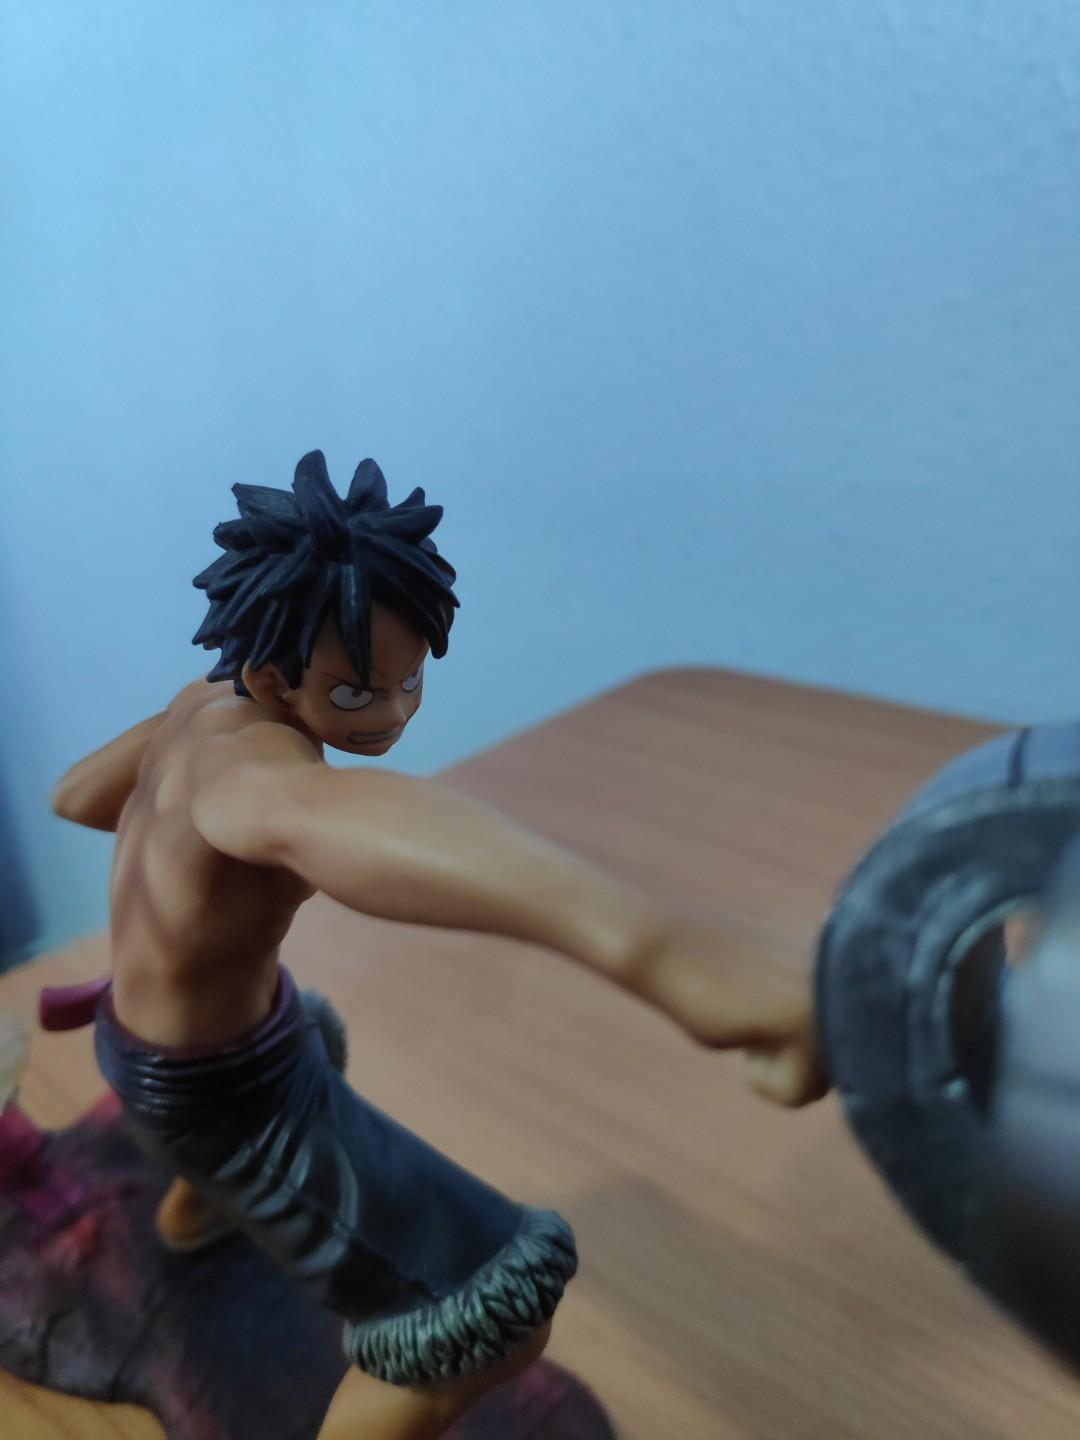 Hot One Piece Film Z Luffy Vs. Zephyr Action Figure 1/8 Scale Painted  Figure Monkey D Luffy Zephyr PVC Figure Toys Brinquedos Anime